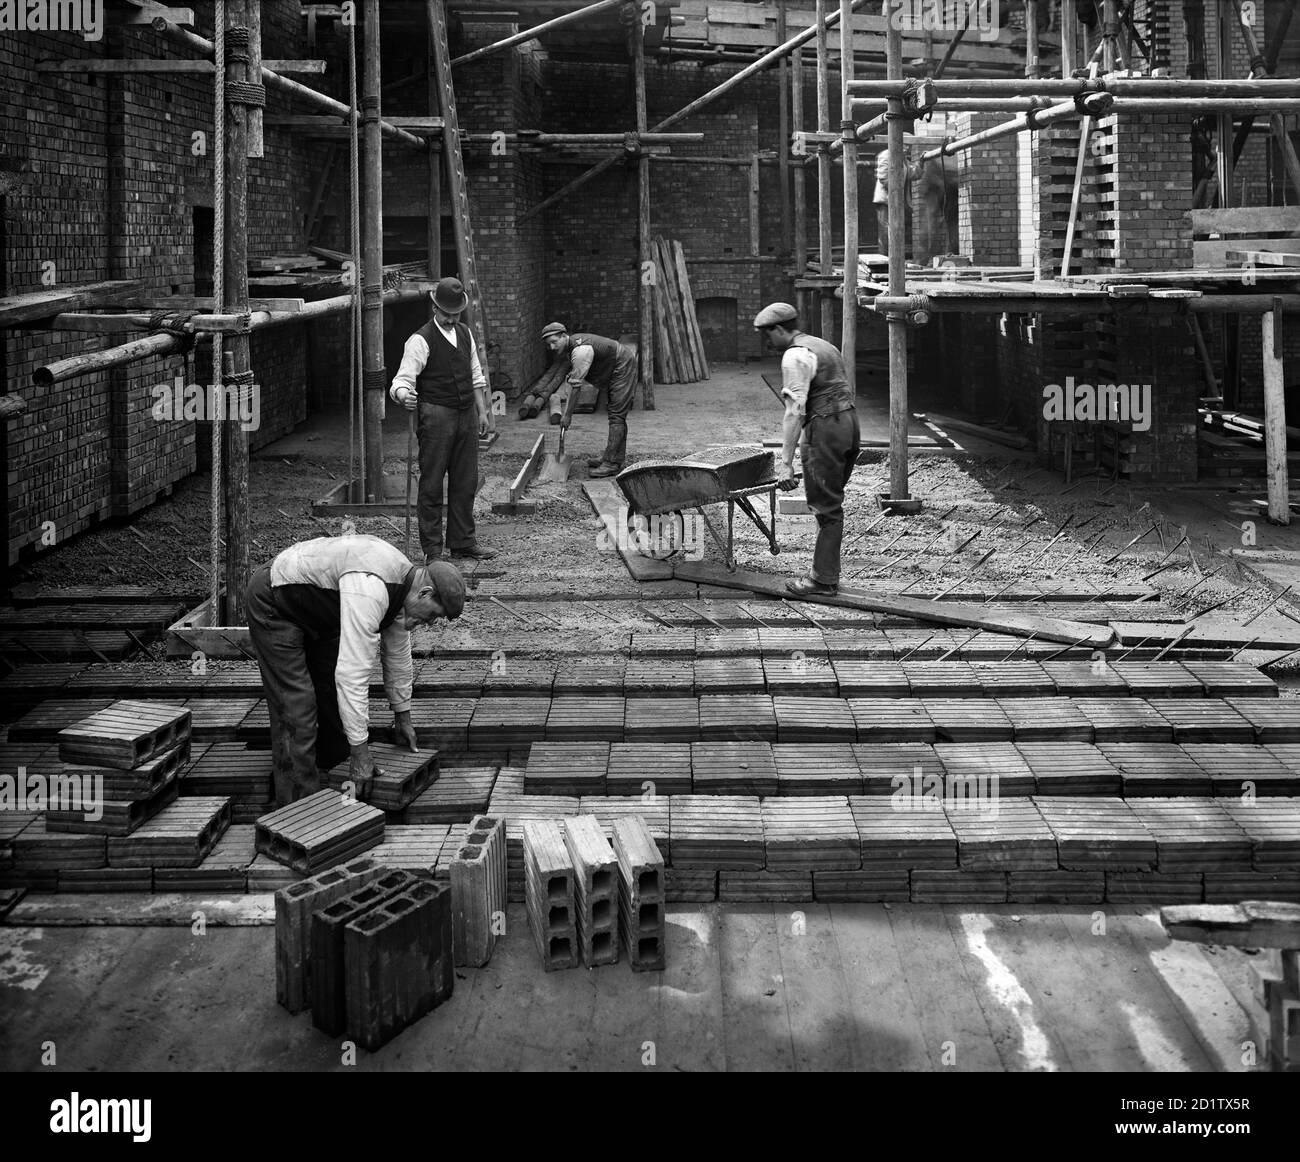 8 LLOYDS AVENUE, City Of London. Construction workers laying a 'hollow pot' reinforced concrete floor at number 8 Lloyds Avenue. The 'hollow pot' system, known as the Kahn system, was invented by Julius Kahn in 1903 and was much used for flooring. This building was designed by Richard Norman Shaw for Associated Portland Cement Manufacturers. Photographed by Bedford Lemere and Co. in 1907. Stock Photo